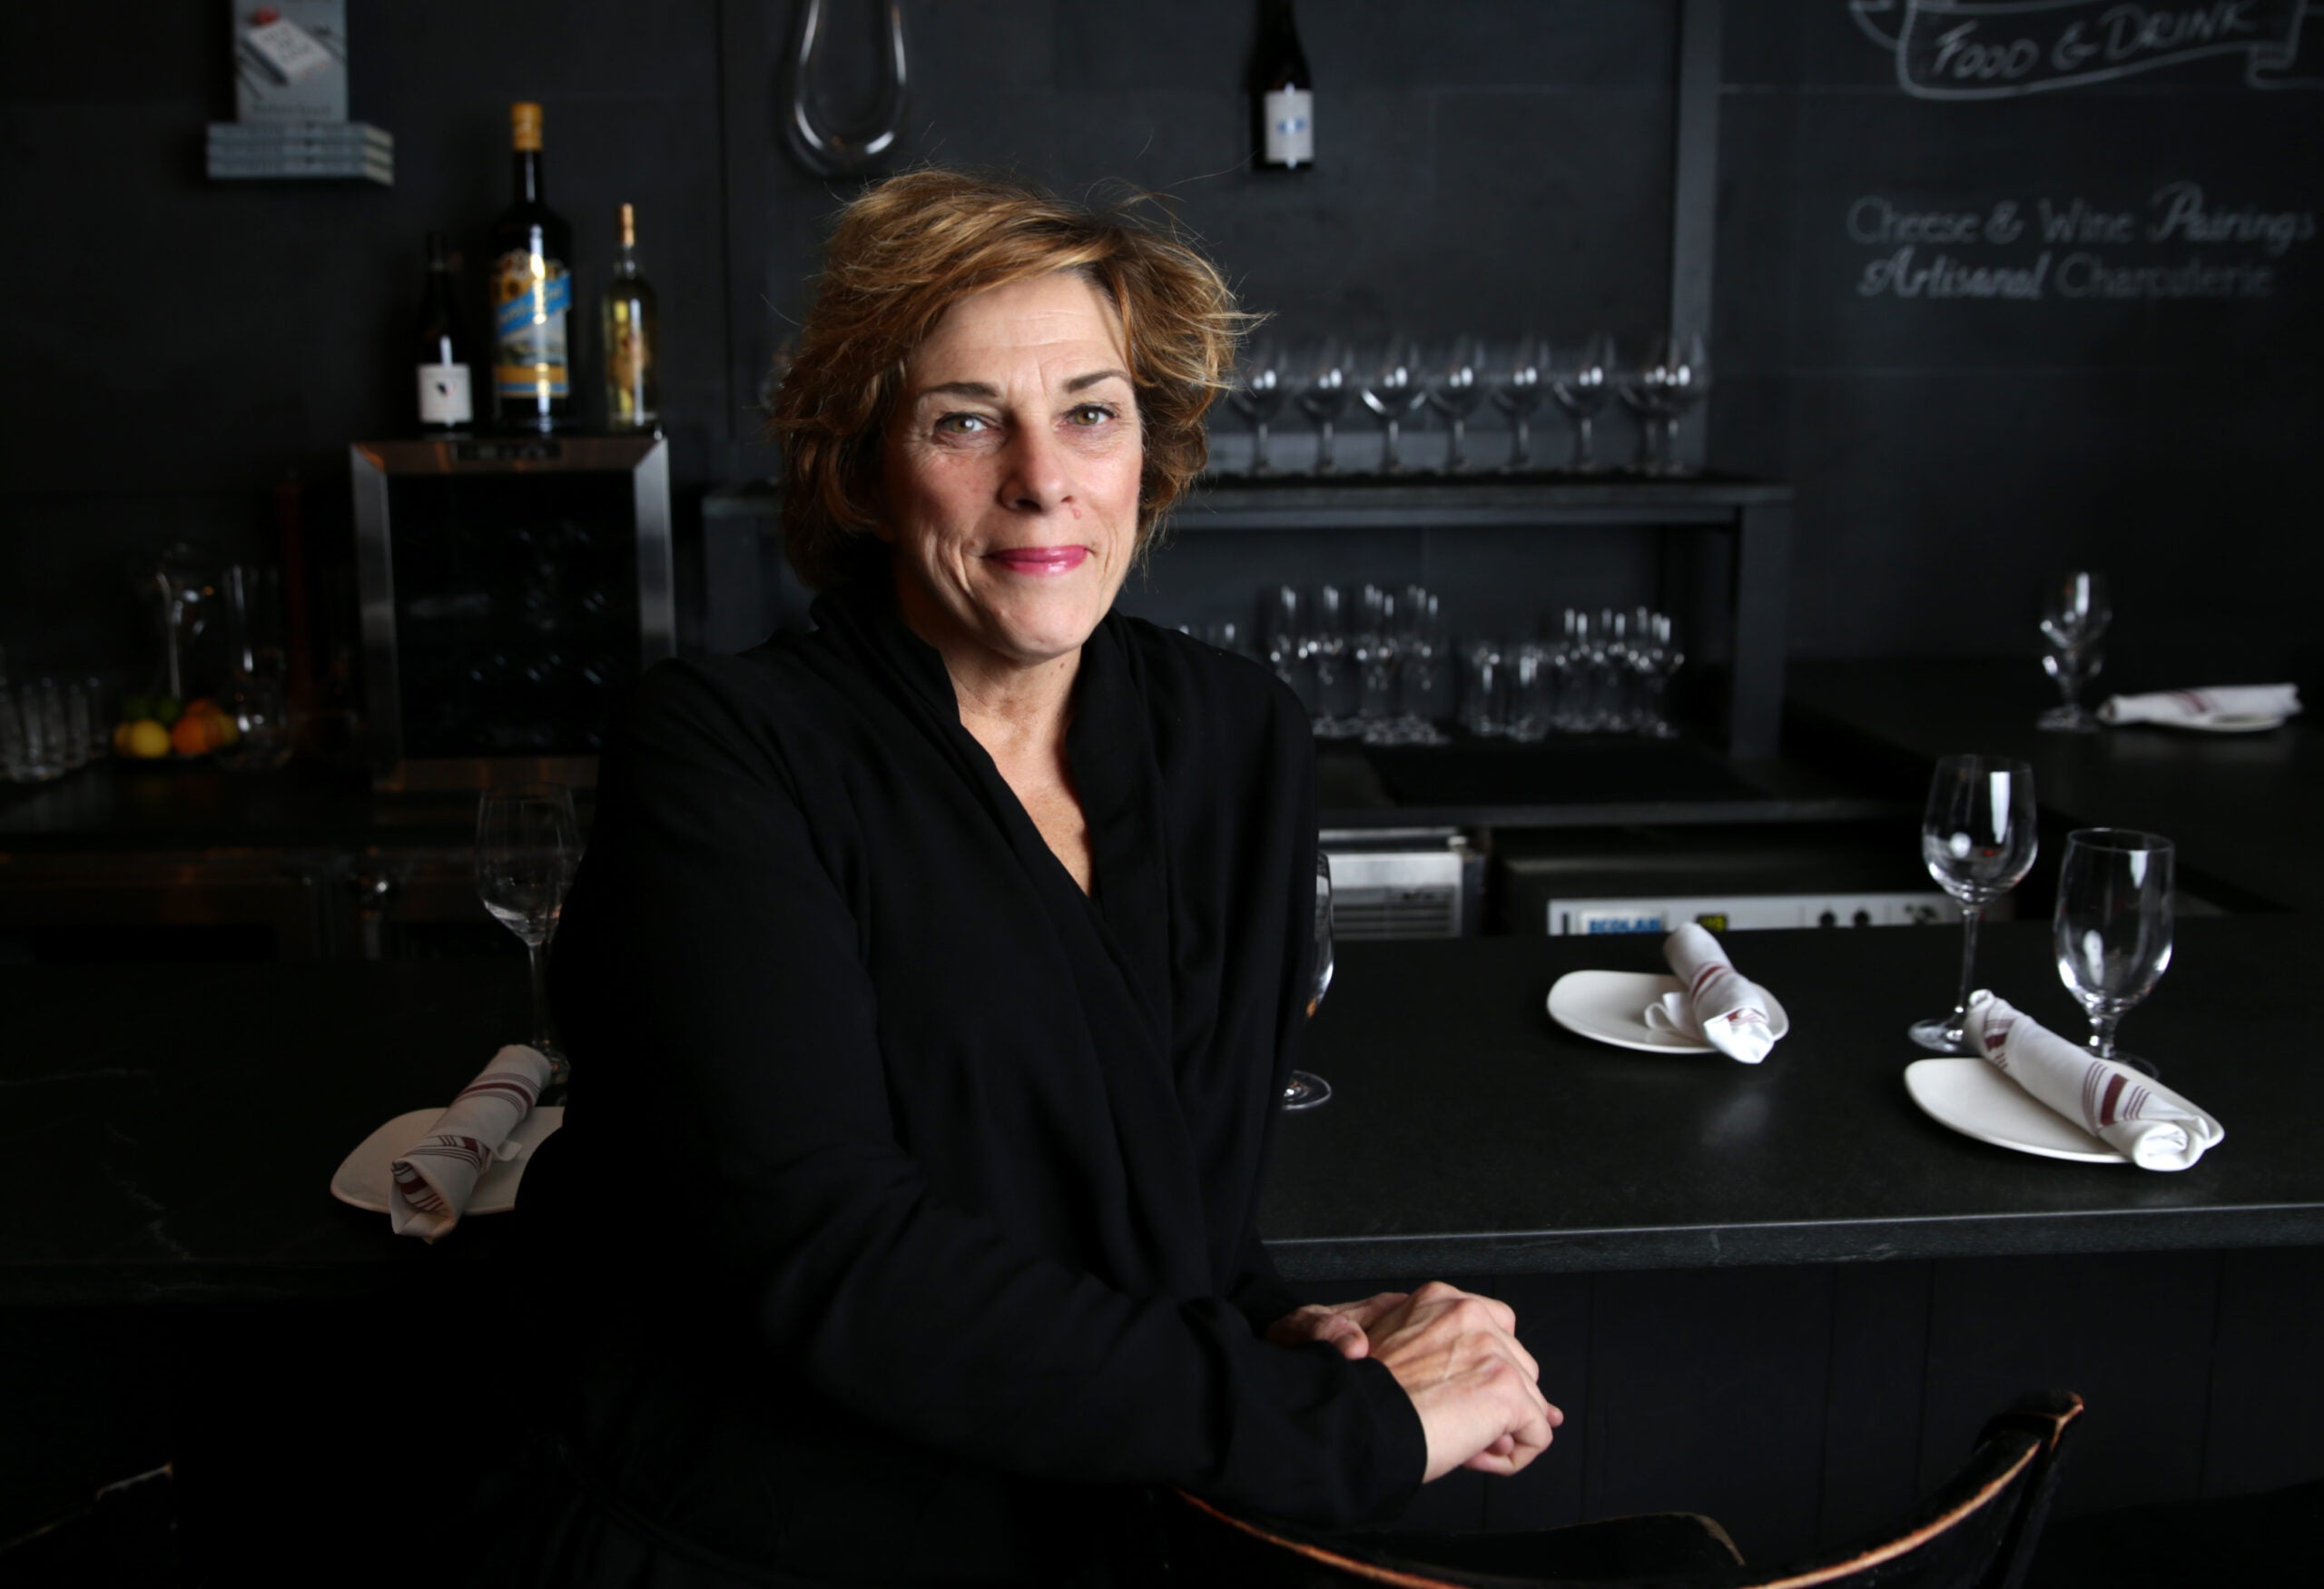 Barbara Lynch photographed inside of her restaurant The Butcher Shop in November 2018.